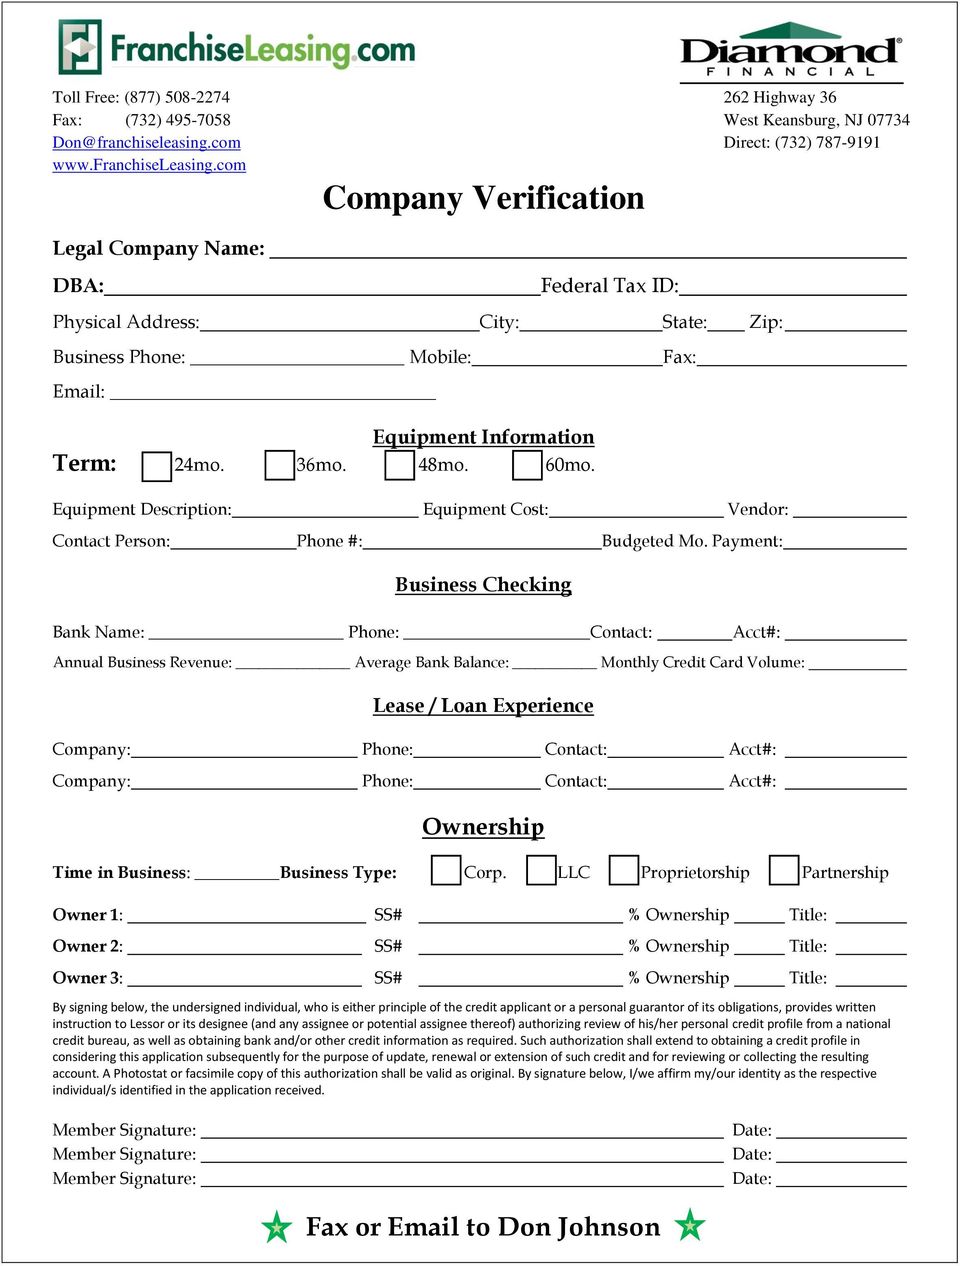 com Company Verification Legal Company Name: DBA: Federal Tax ID: Physical Address: City: State: Zip: Business Phone: Mobile: Fax: Email: Equipment Information Term: 24mo. 36mo. 48mo. 60mo.